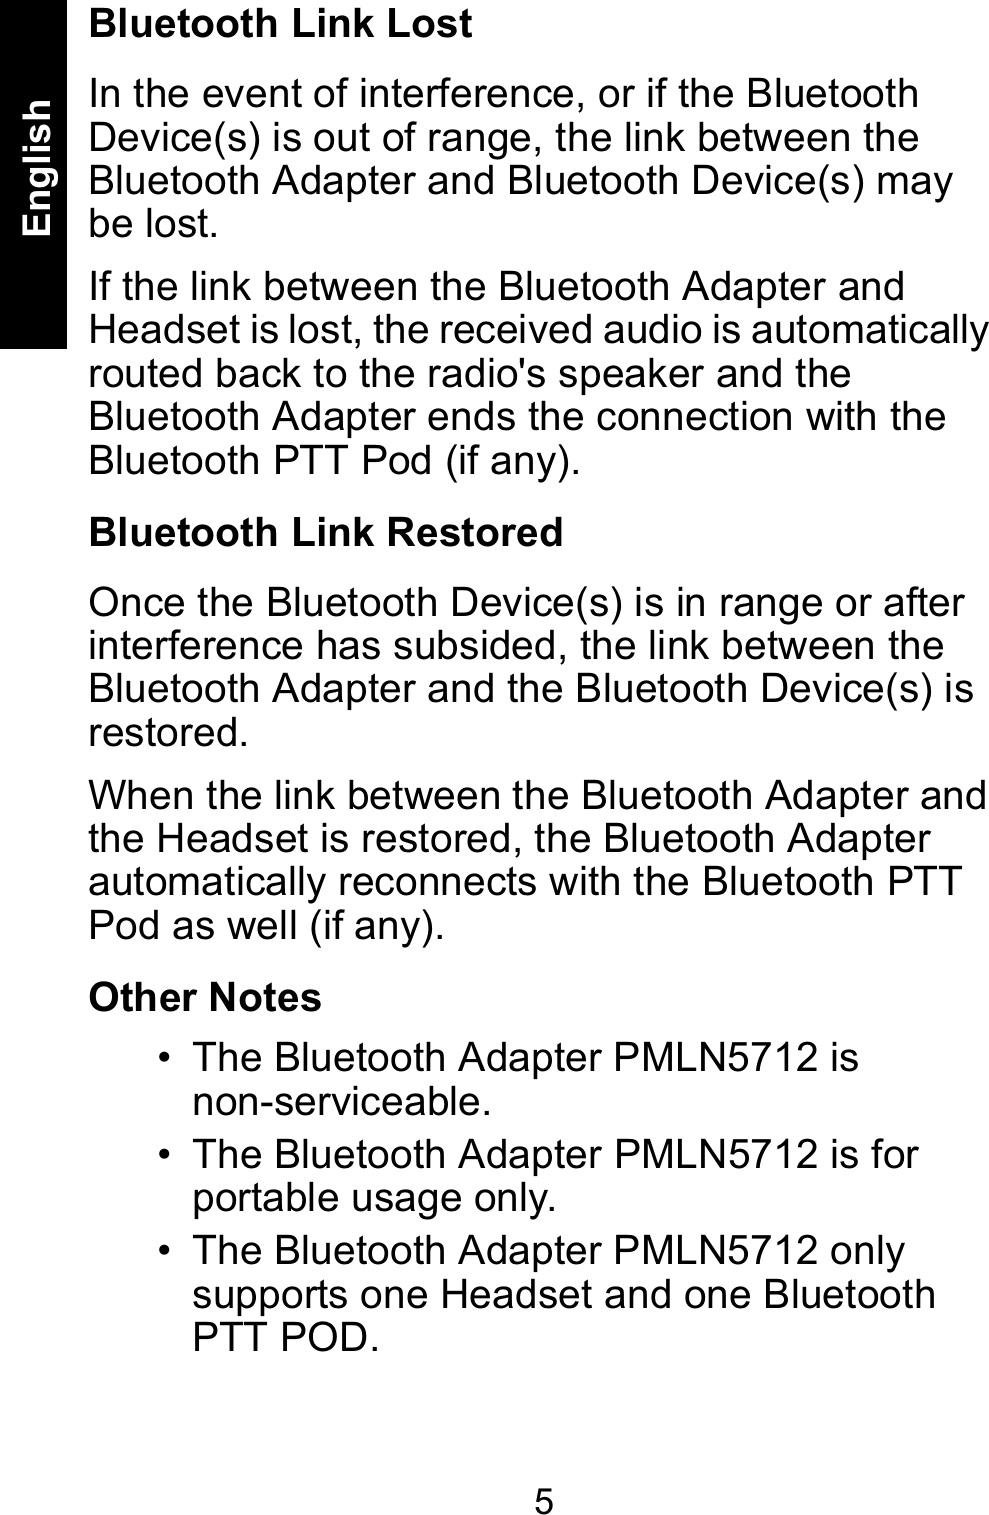 5EnglishBluetooth Link LostIn the event of interference, or if the Bluetooth Device(s) is out of range, the link between the Bluetooth Adapter and Bluetooth Device(s) may be lost. If the link between the Bluetooth Adapter and Headset is lost, the received audio is automatically routed back to the radio&apos;s speaker and the Bluetooth Adapter ends the connection with the Bluetooth PTT Pod (if any).  Bluetooth Link RestoredOnce the Bluetooth Device(s) is in range or after interference has subsided, the link between the Bluetooth Adapter and the Bluetooth Device(s) is restored. When the link between the Bluetooth Adapter and the Headset is restored, the Bluetooth Adapter automatically reconnects with the Bluetooth PTT Pod as well (if any). Other Notes • The Bluetooth Adapter PMLN5712 is non-serviceable. • The Bluetooth Adapter PMLN5712 is for portable usage only.• The Bluetooth Adapter PMLN5712 only supports one Headset and one Bluetooth PTT POD. 